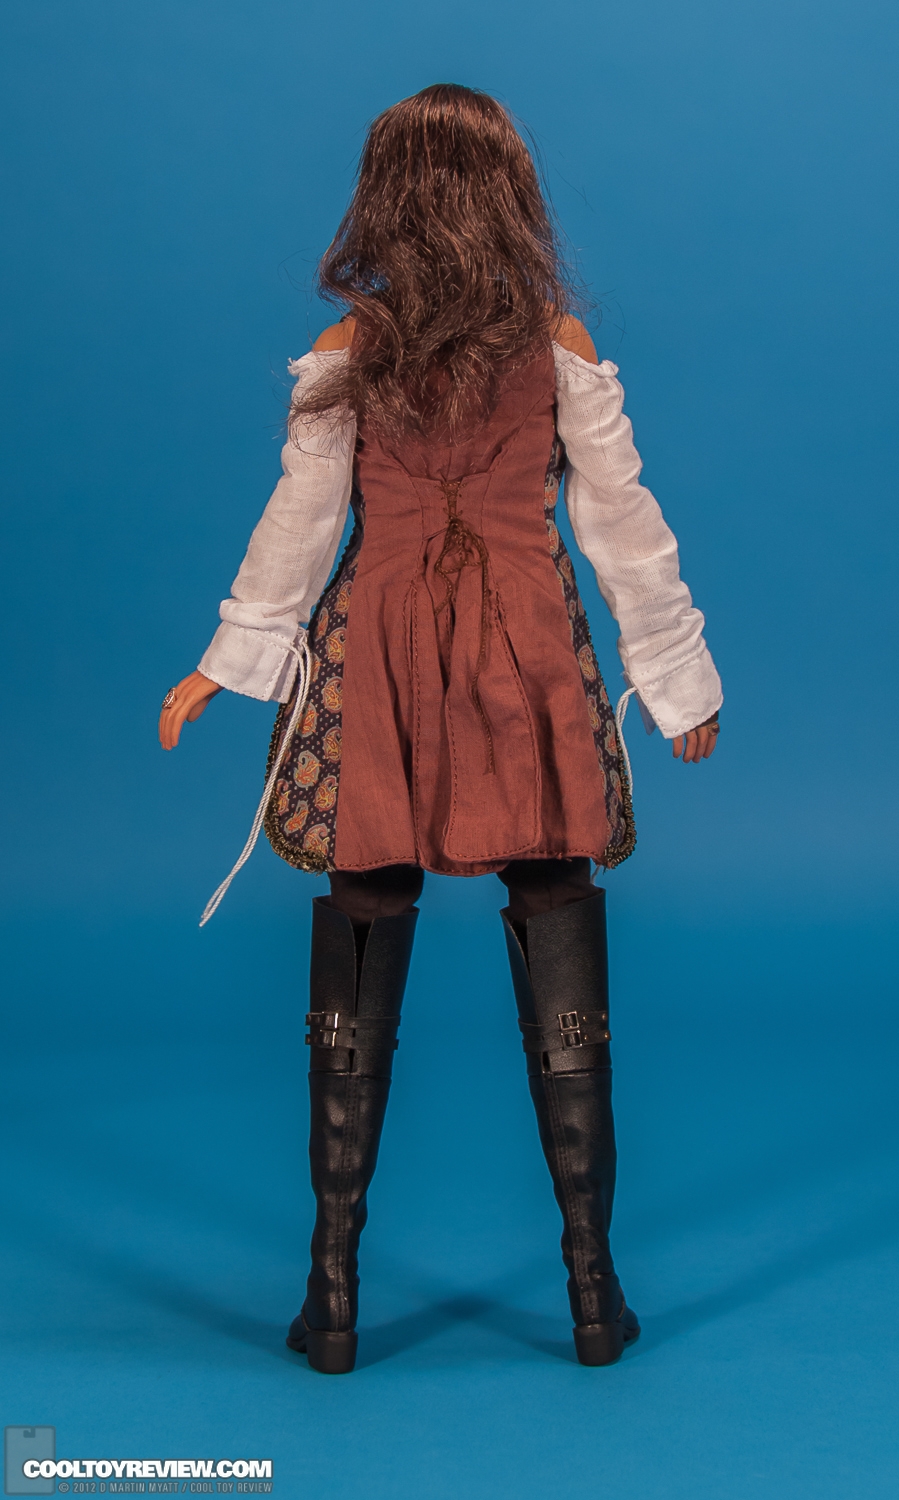 Angelica_Disney_Pirates_Of_The_Caribbean_Hot_Toys-08.jpg